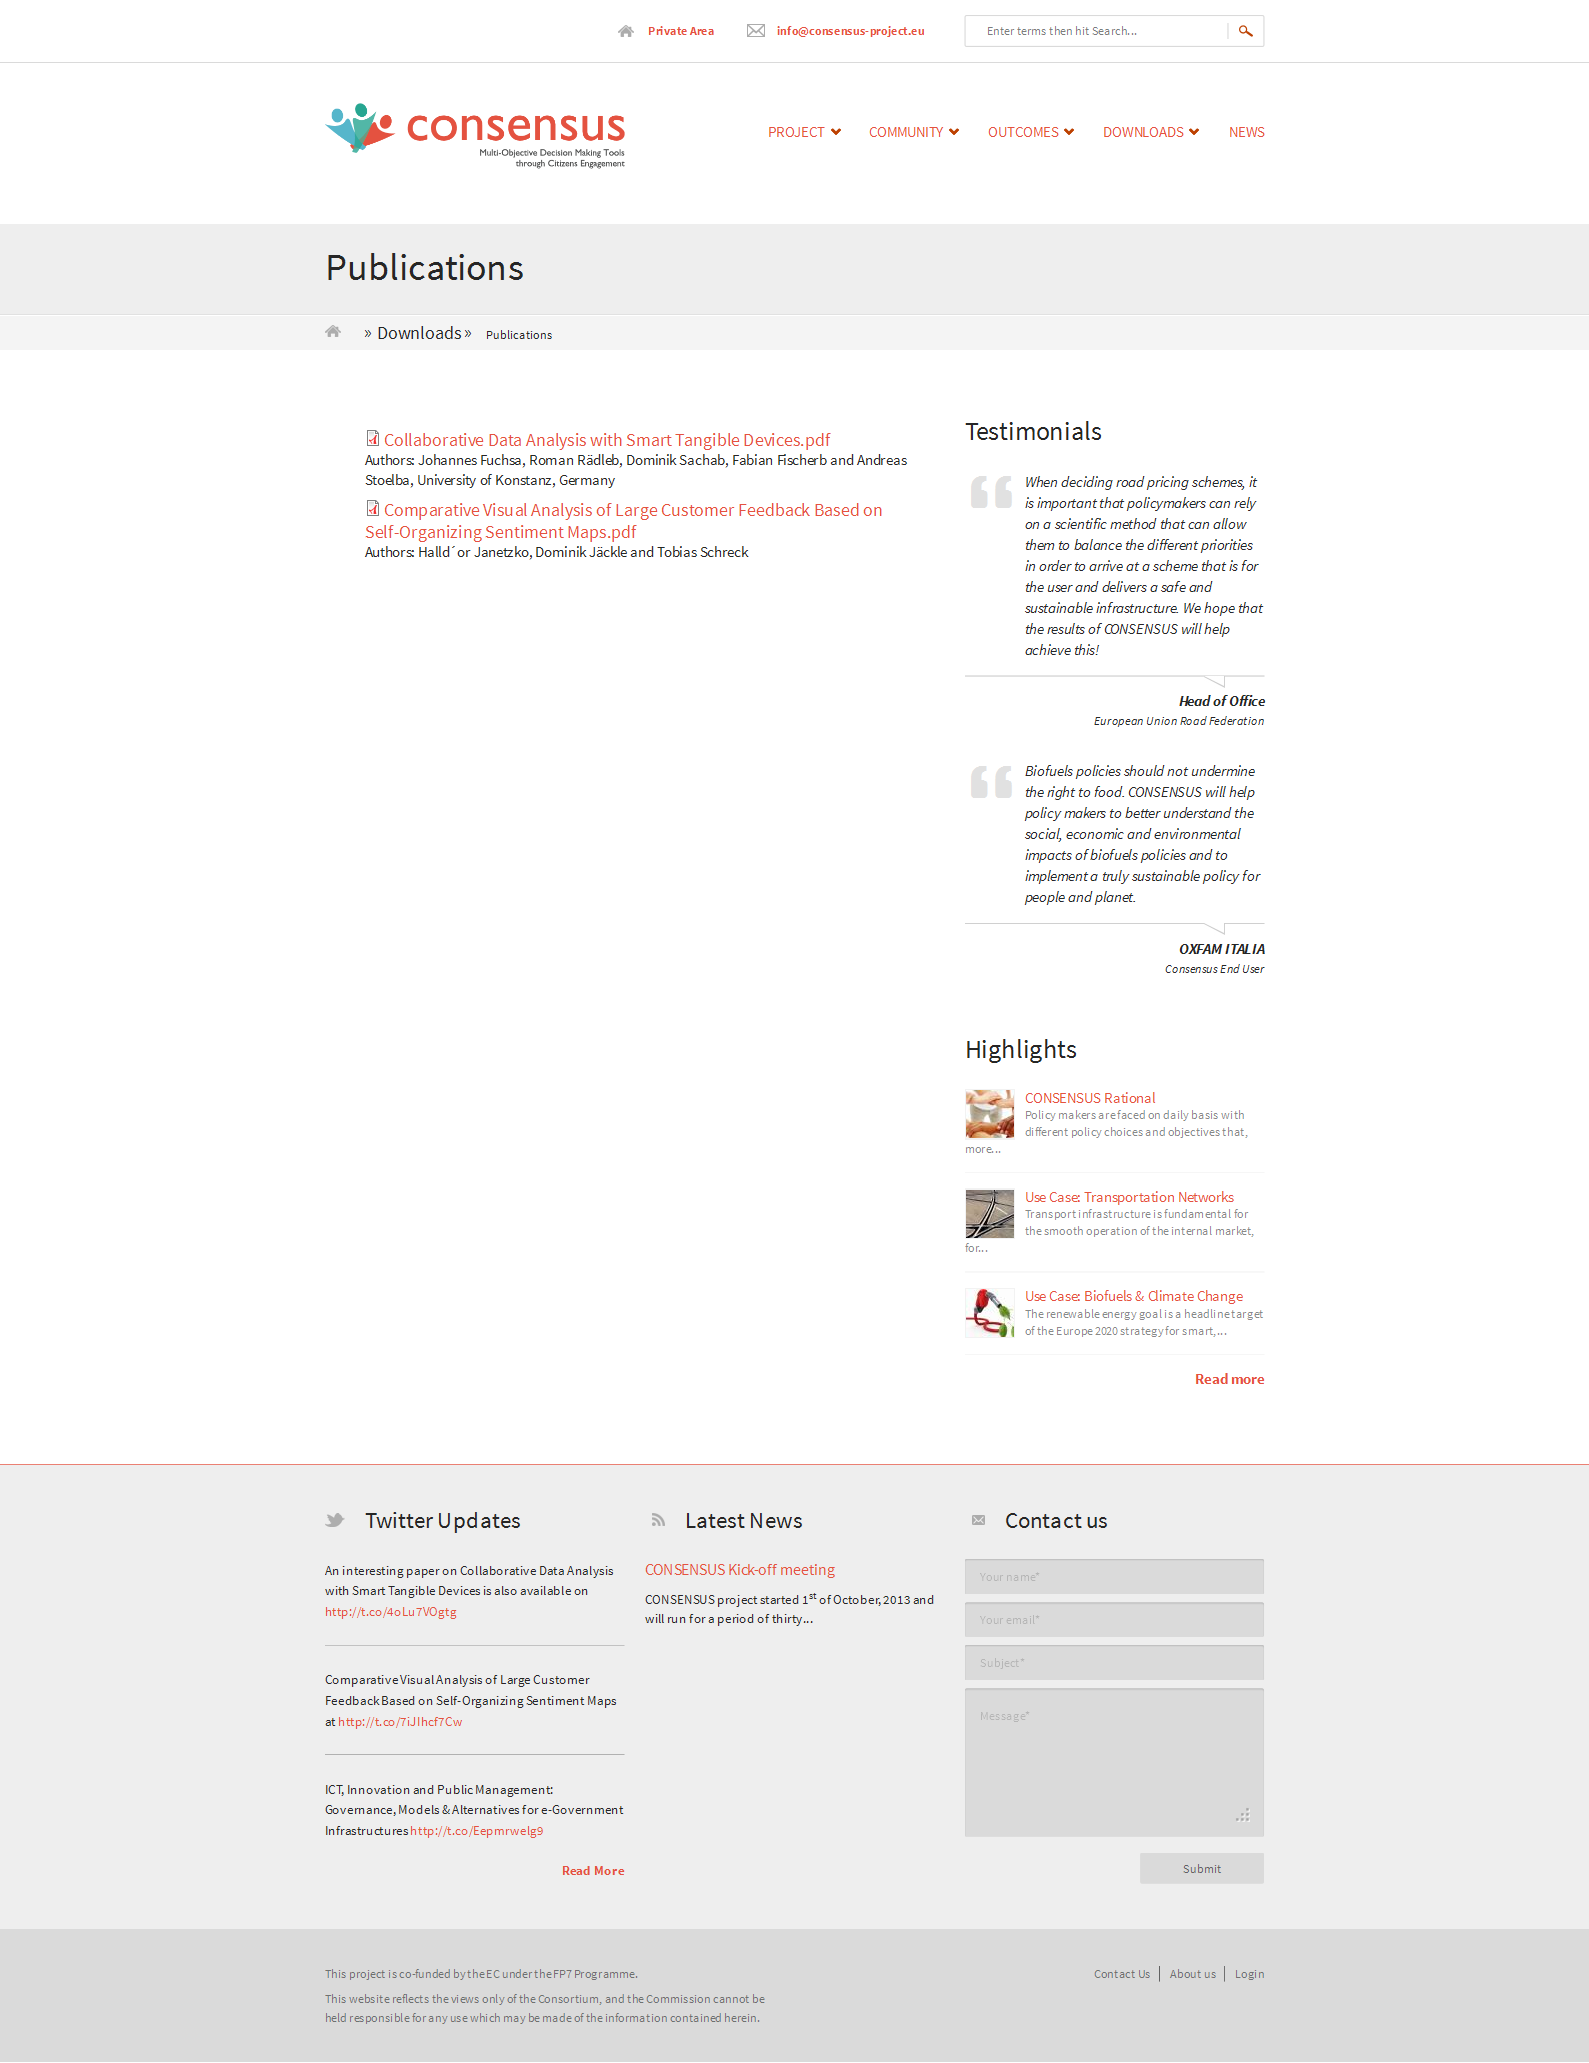 Publications webpage, as presented in the Figure 11 (Snapshot of the Publications page), provides access to the project publications that will be uploaded throughout the project period.